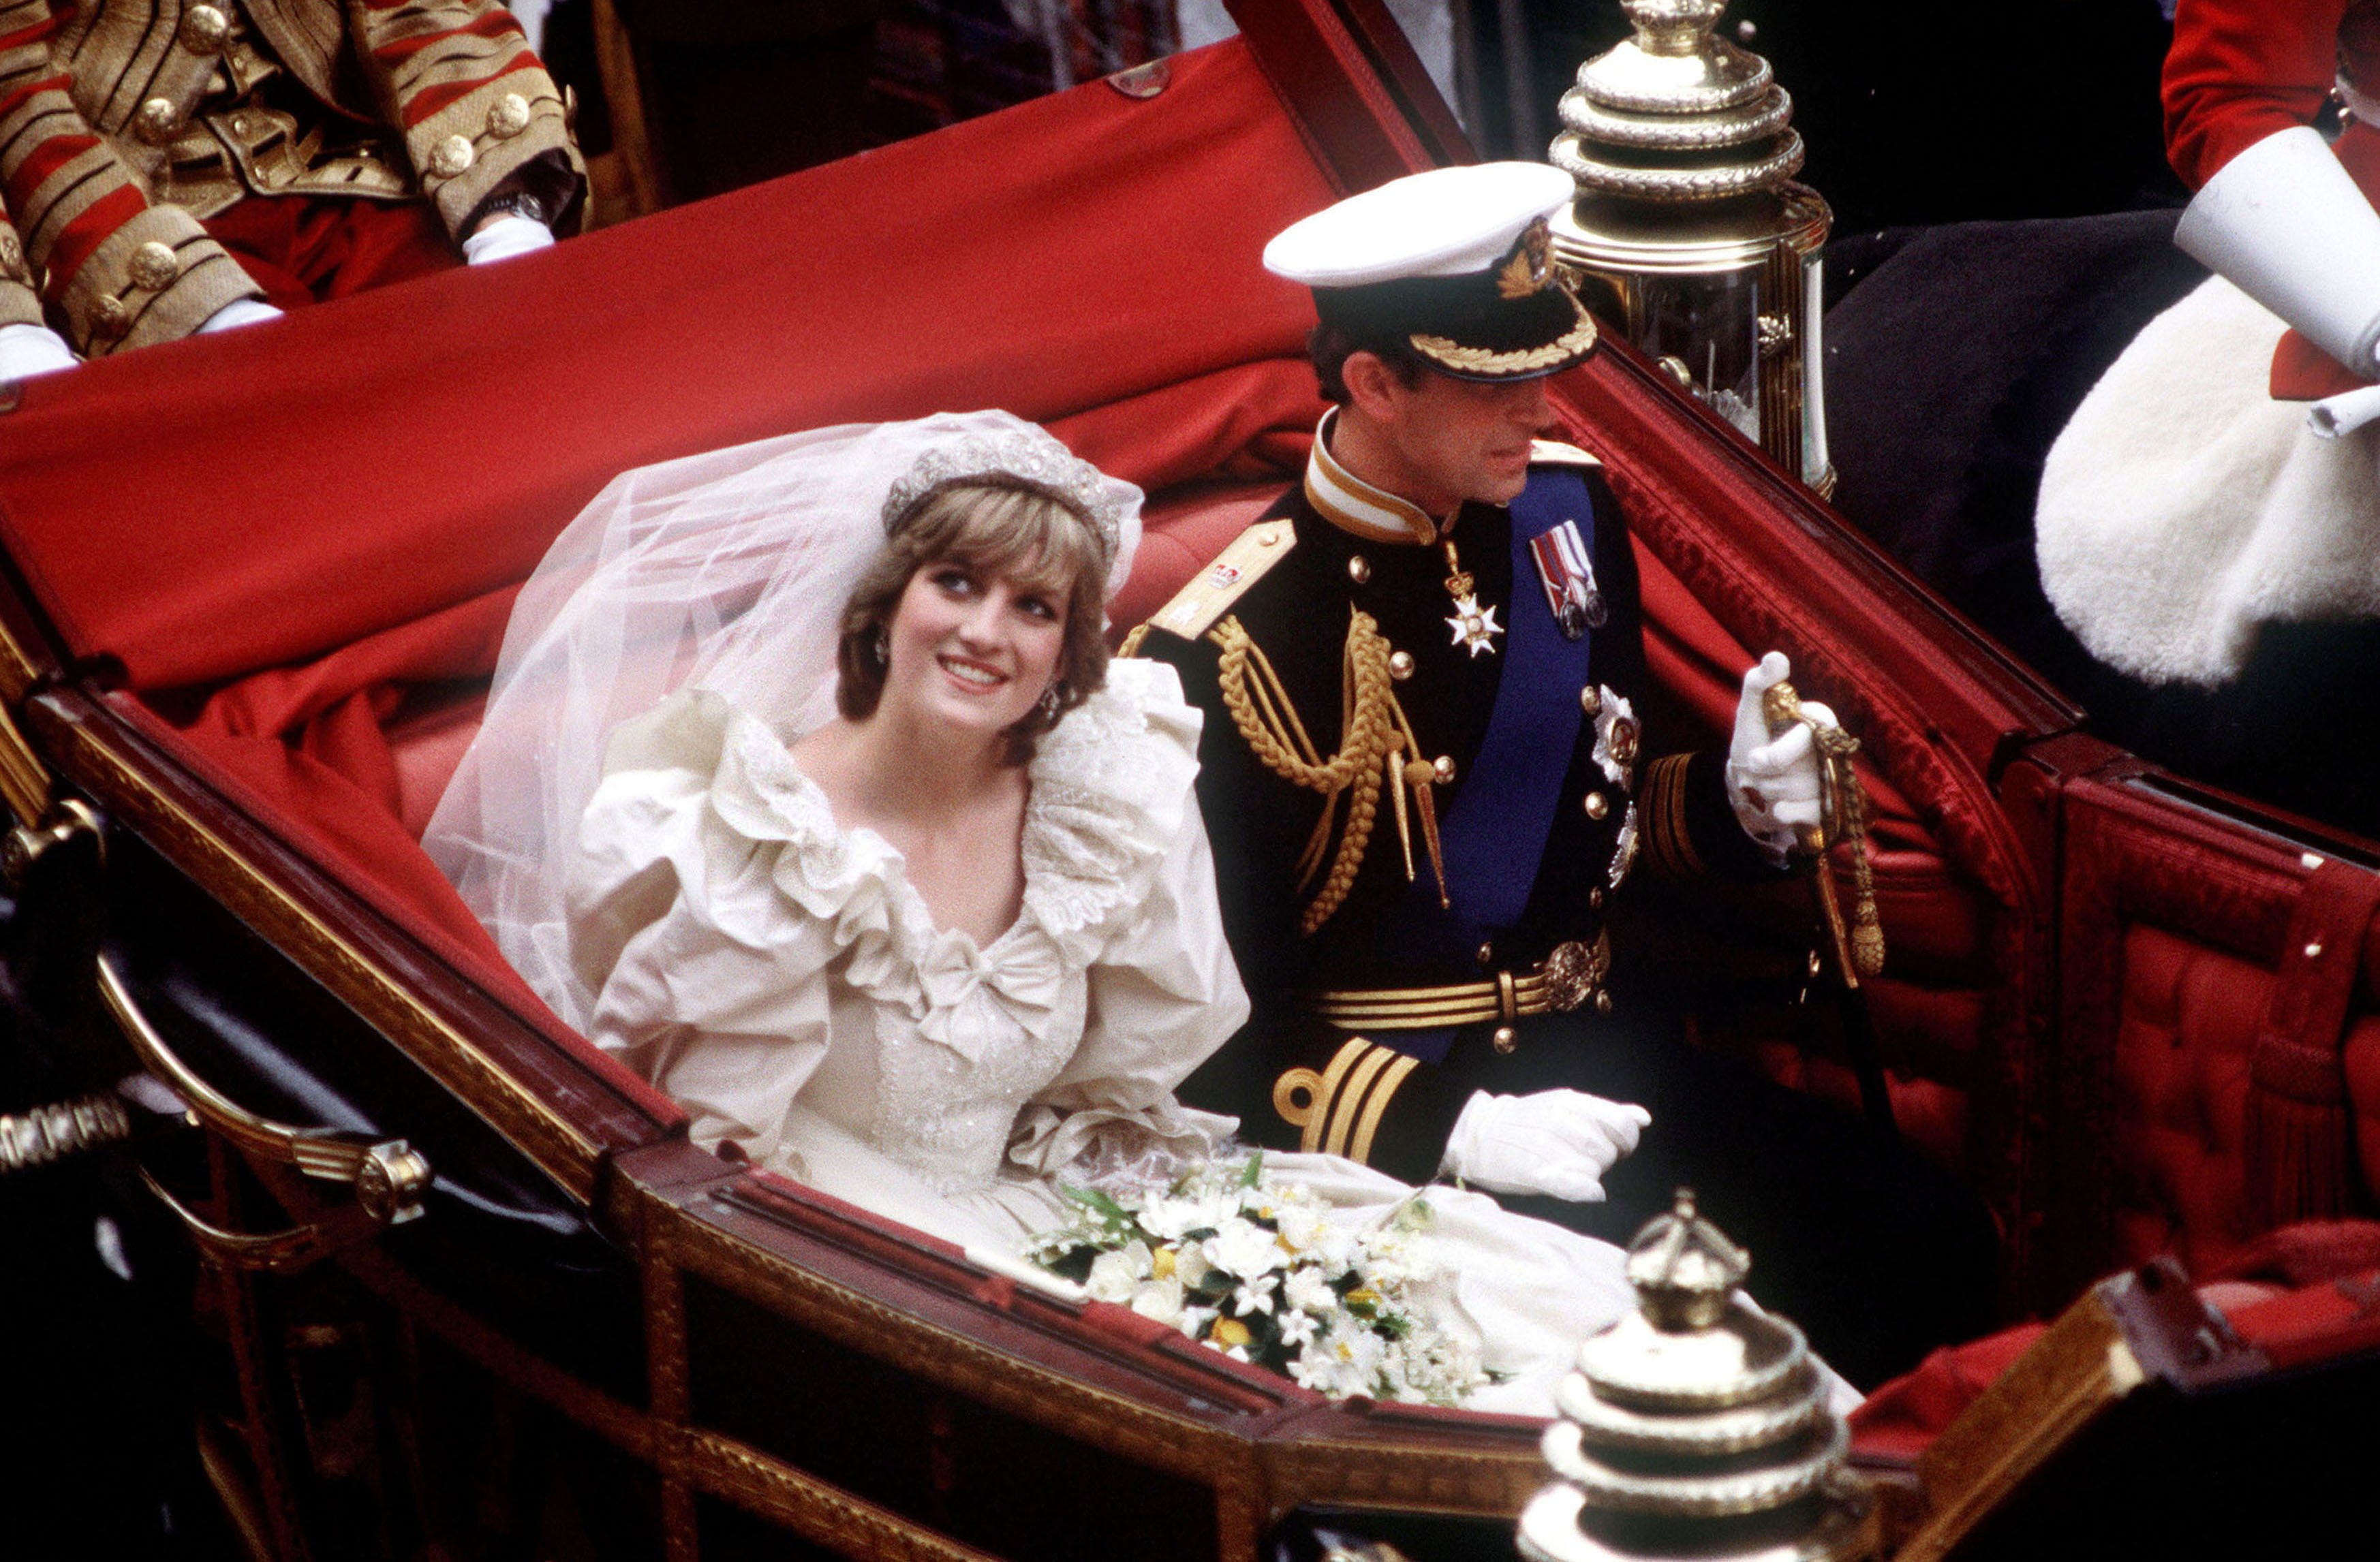 The Prince and Princess of Wales return to Buckingham Palace by carriage after their wedding, 29th July 1981. | Source: Princess Diana Archive/Getty Images